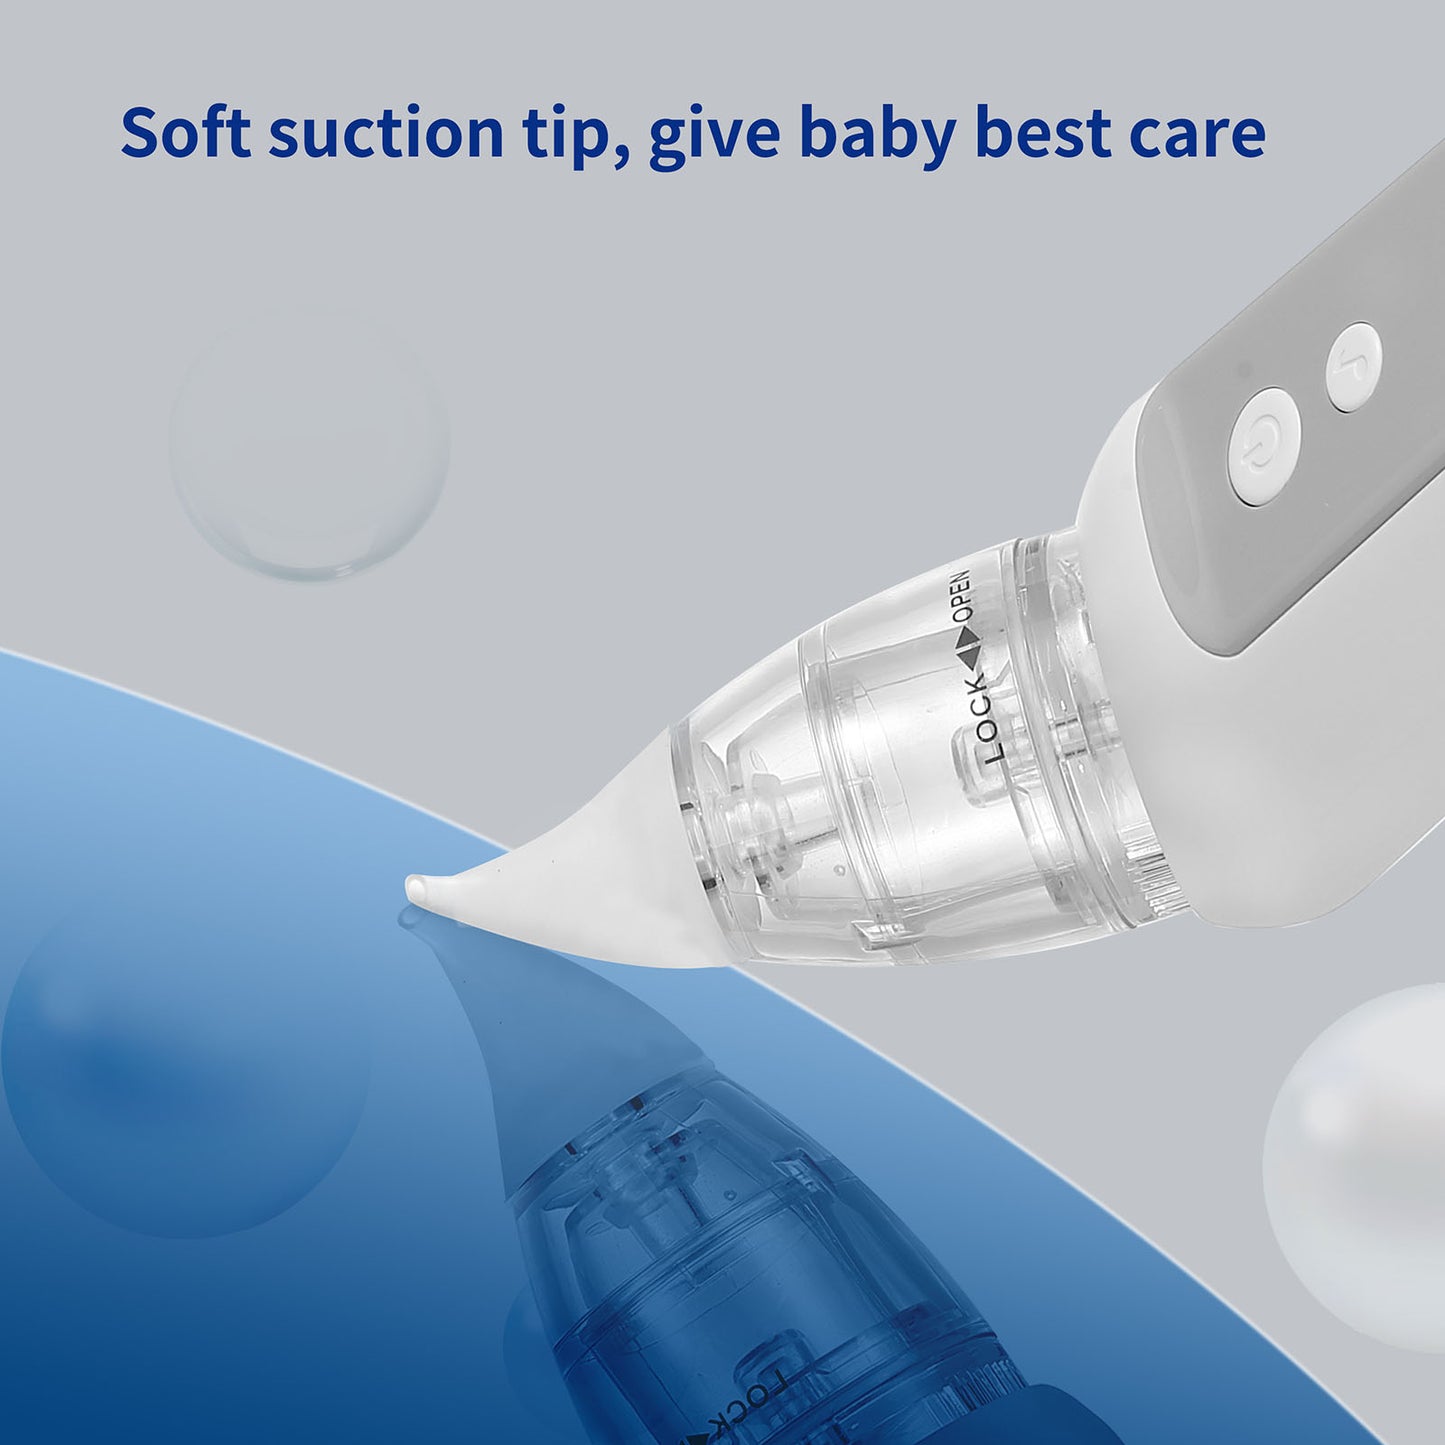 Baby Nasal Aspirator Nose Sucker for Baby echargeable with Music Function Adjustable Volume